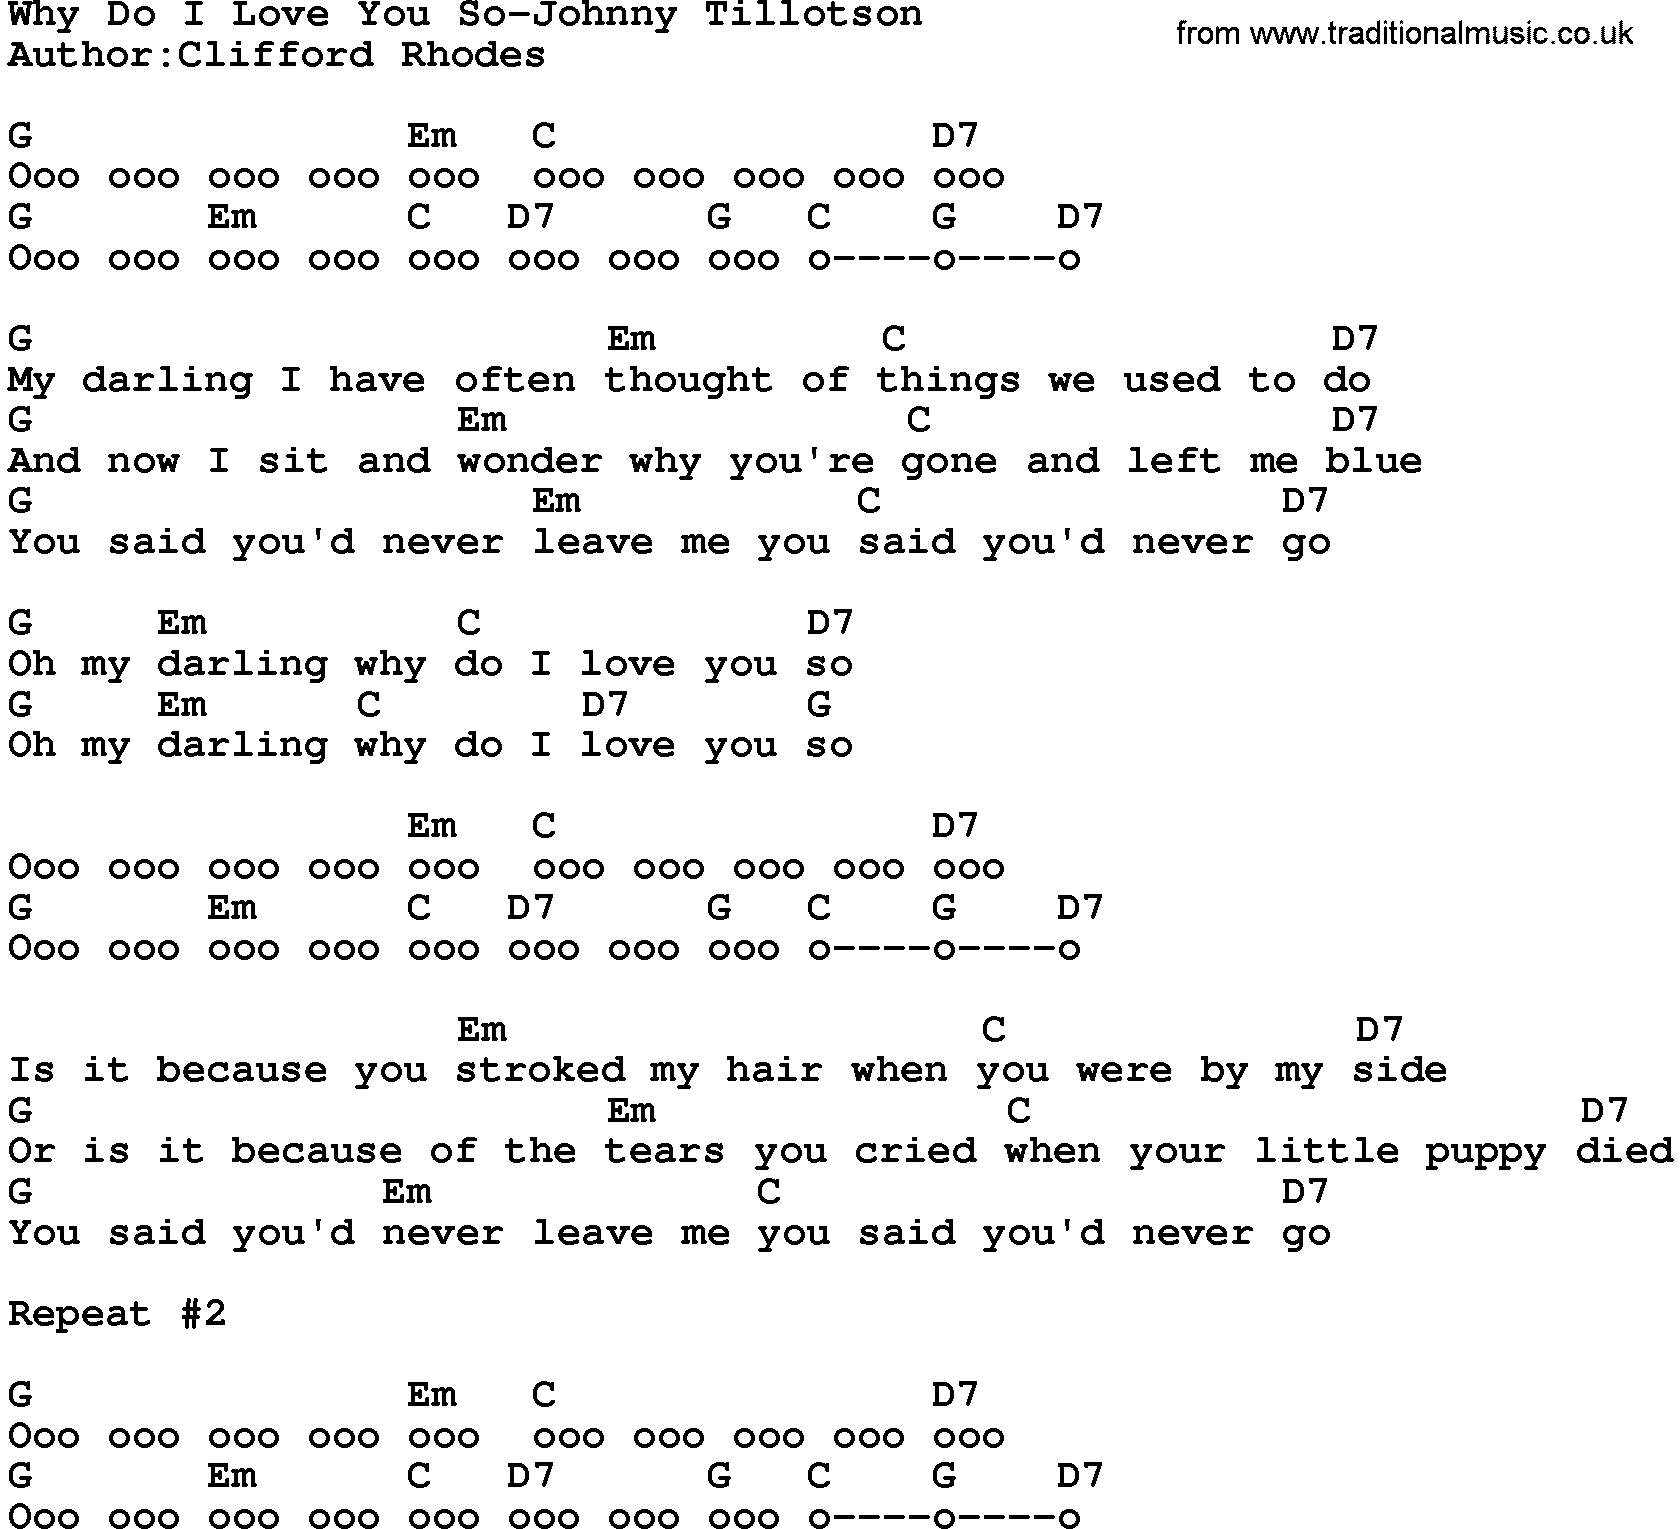 Country music song: Why Do I Love You So-Johnny Tillotson lyrics and chords